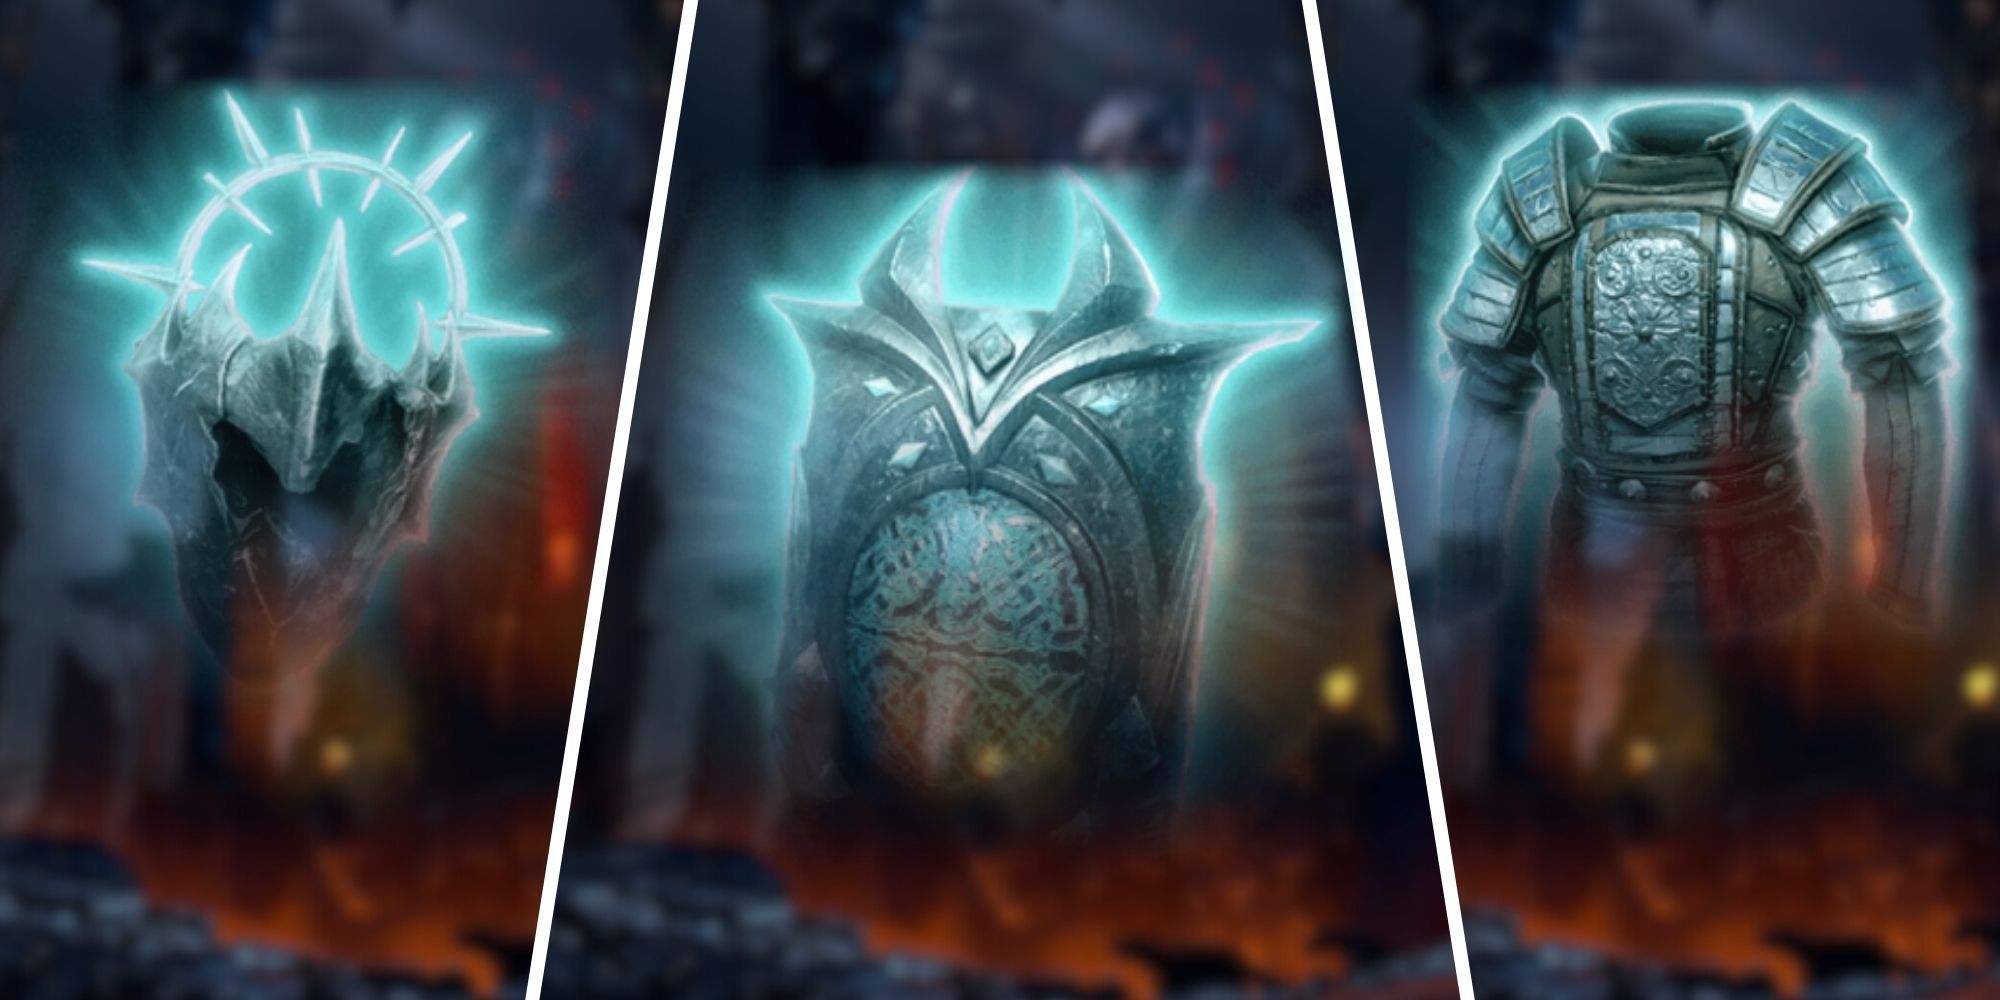 Adamantine Forge Items helm, shield and armor side by side from Baldur's Gate 3